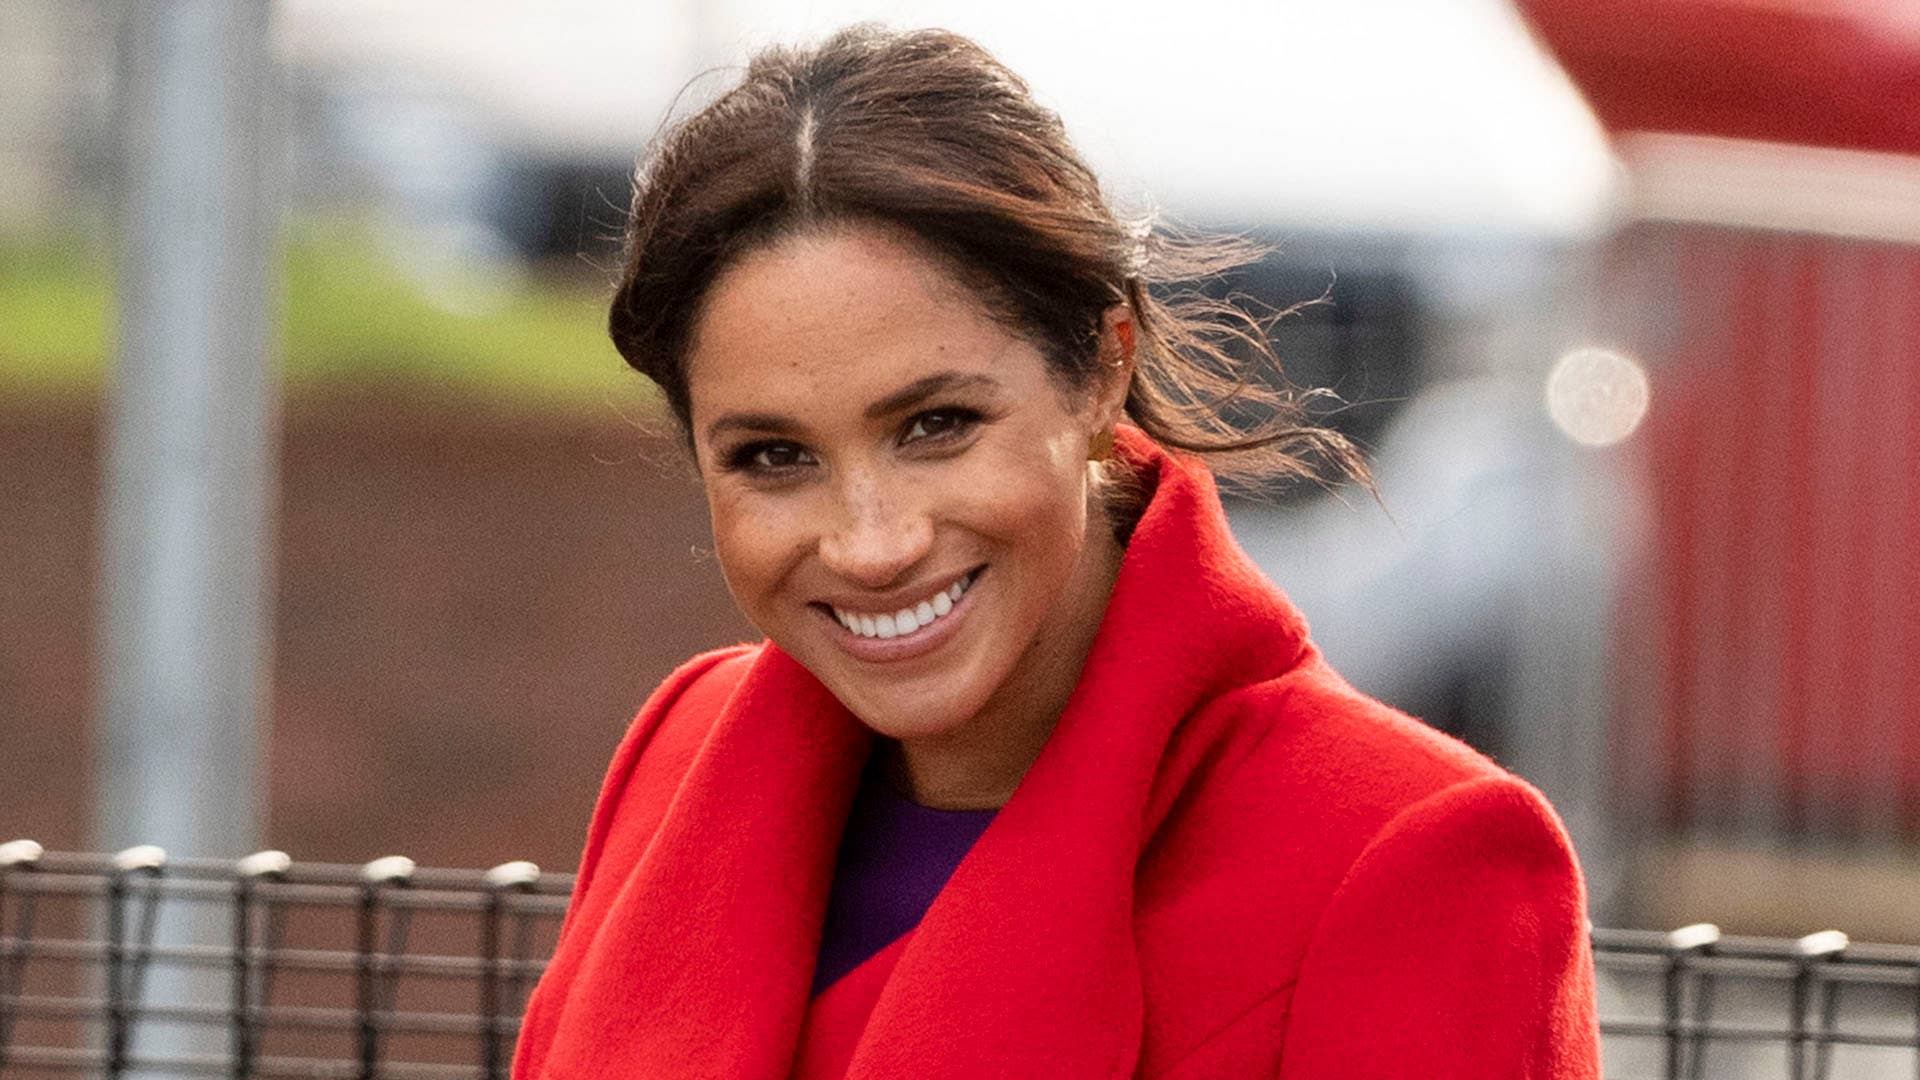 Meghan Markle photographed in England